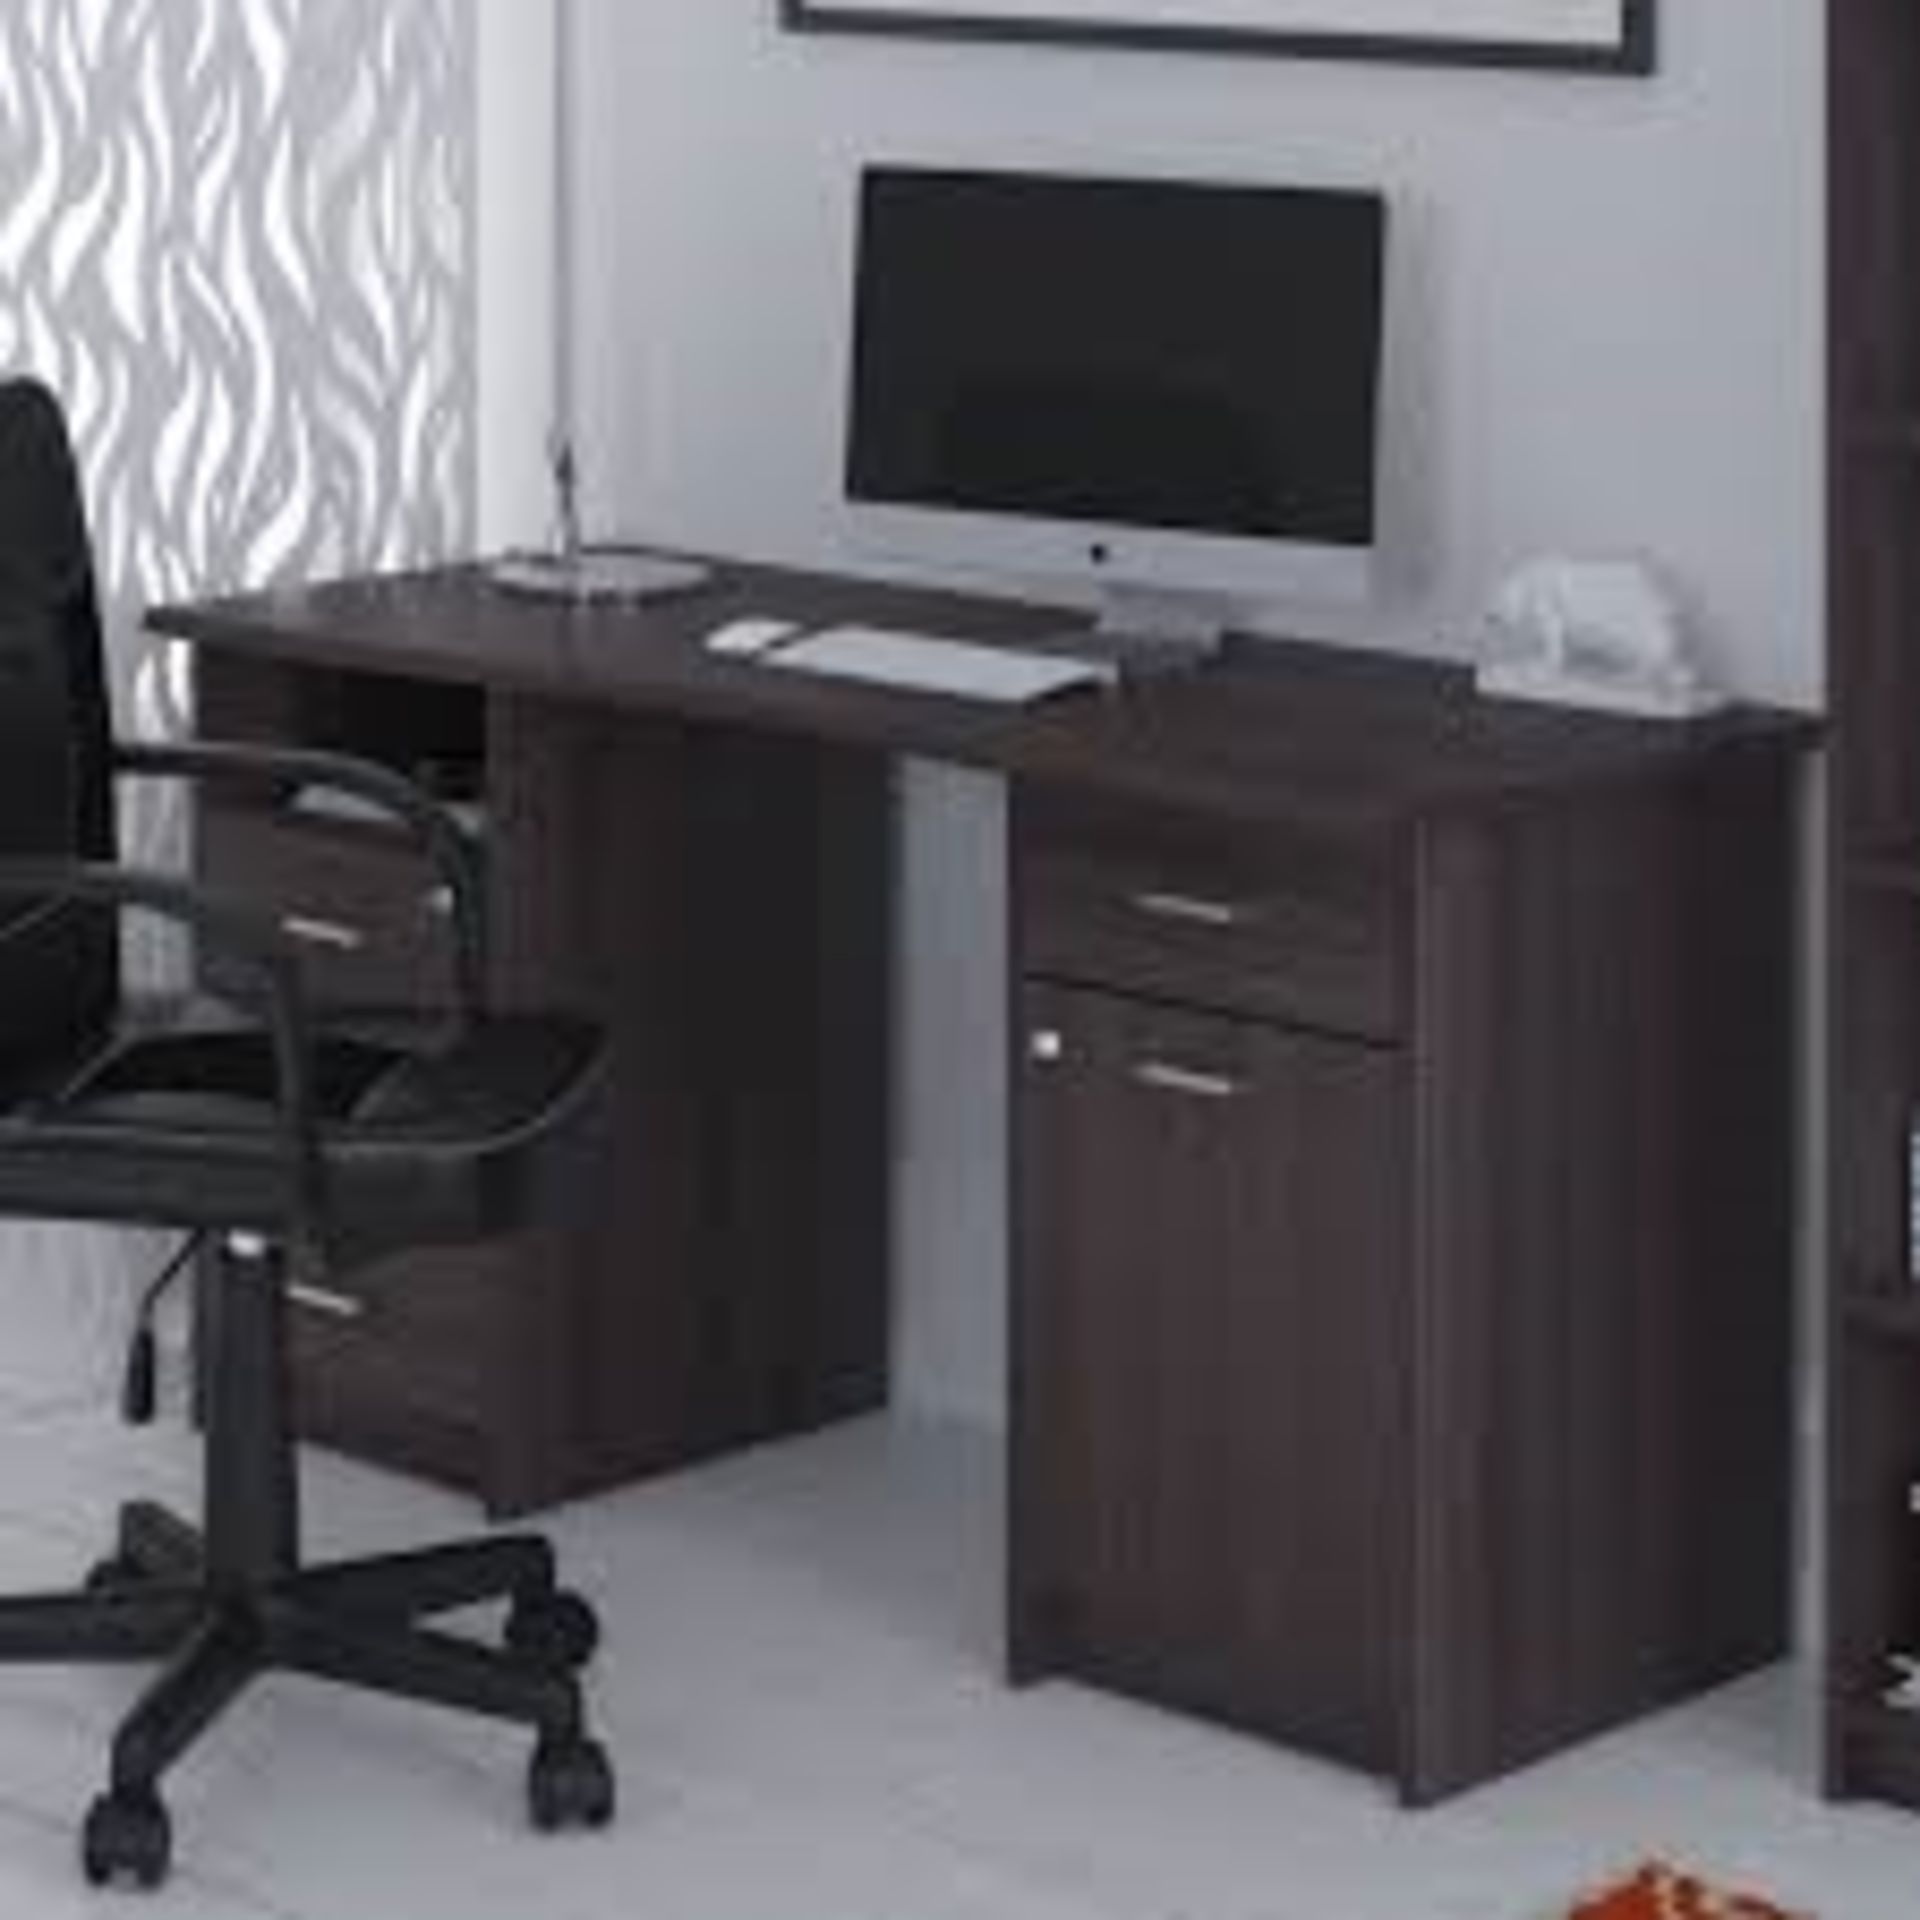 1 GRADE A BOXED MONACO DESK IN VOLCANO OAK / RRP £219.00 (VIEWING HIGHLY RECOMMENDED)